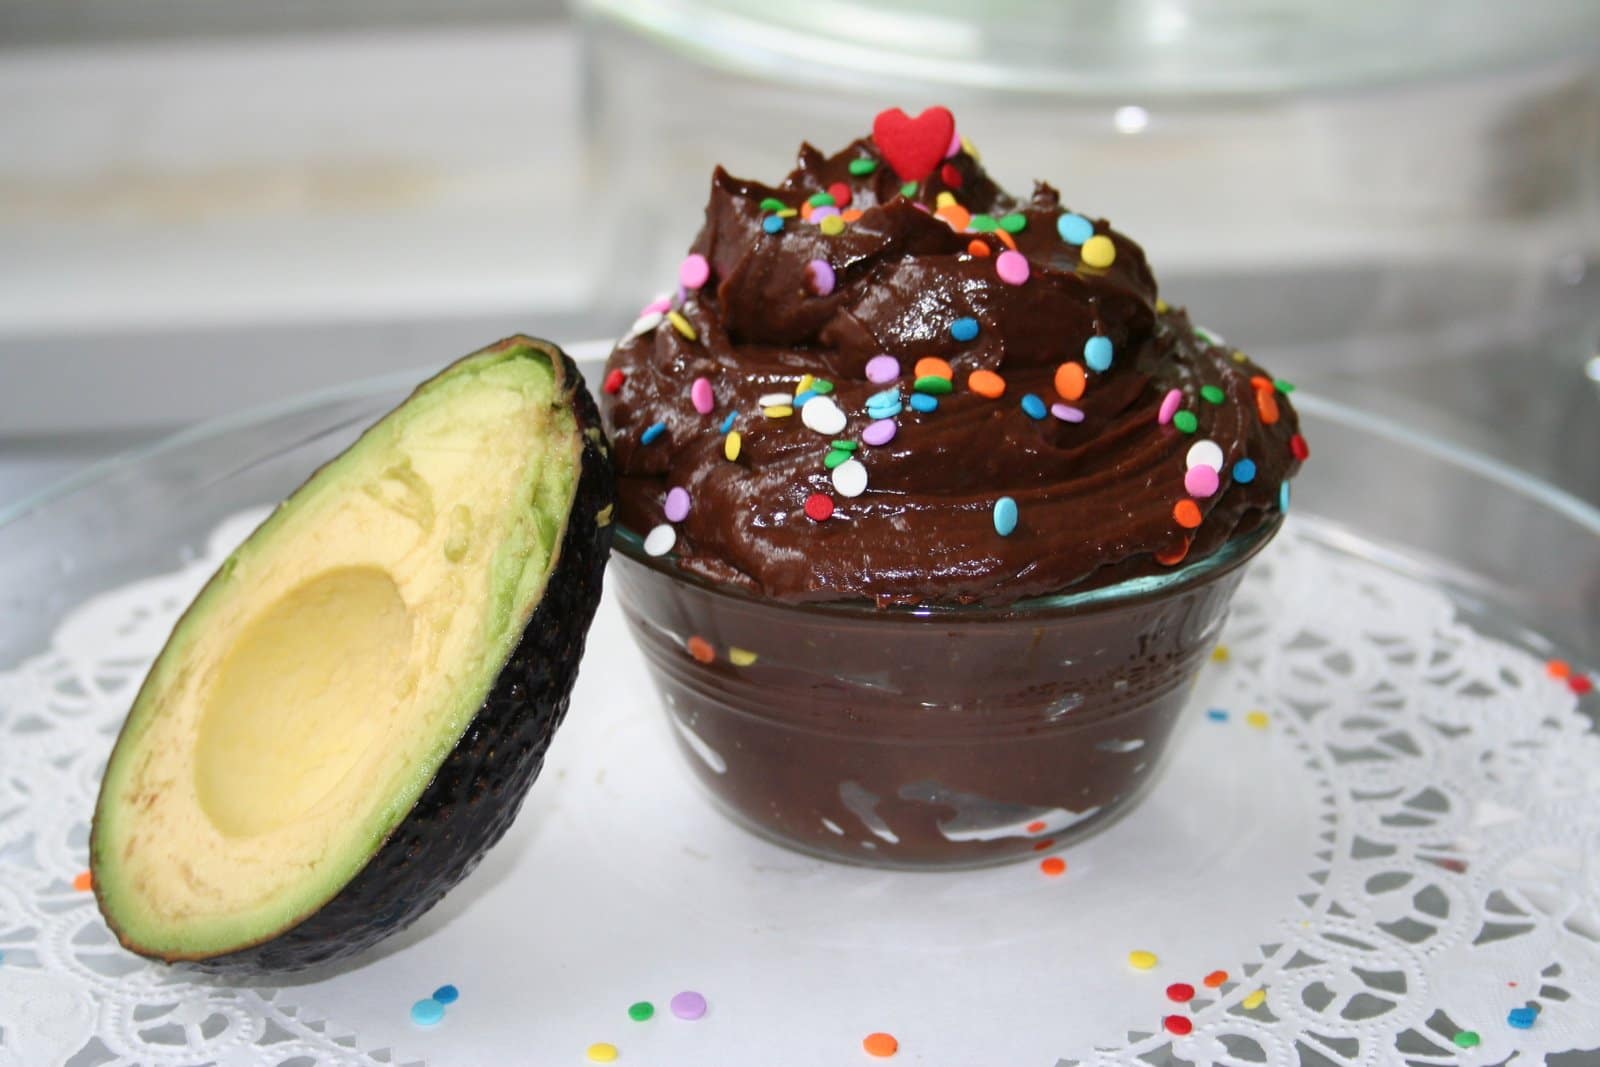 Small ramekin of avocado mousse with colorful sprinkles with half an avocado sitting on plate